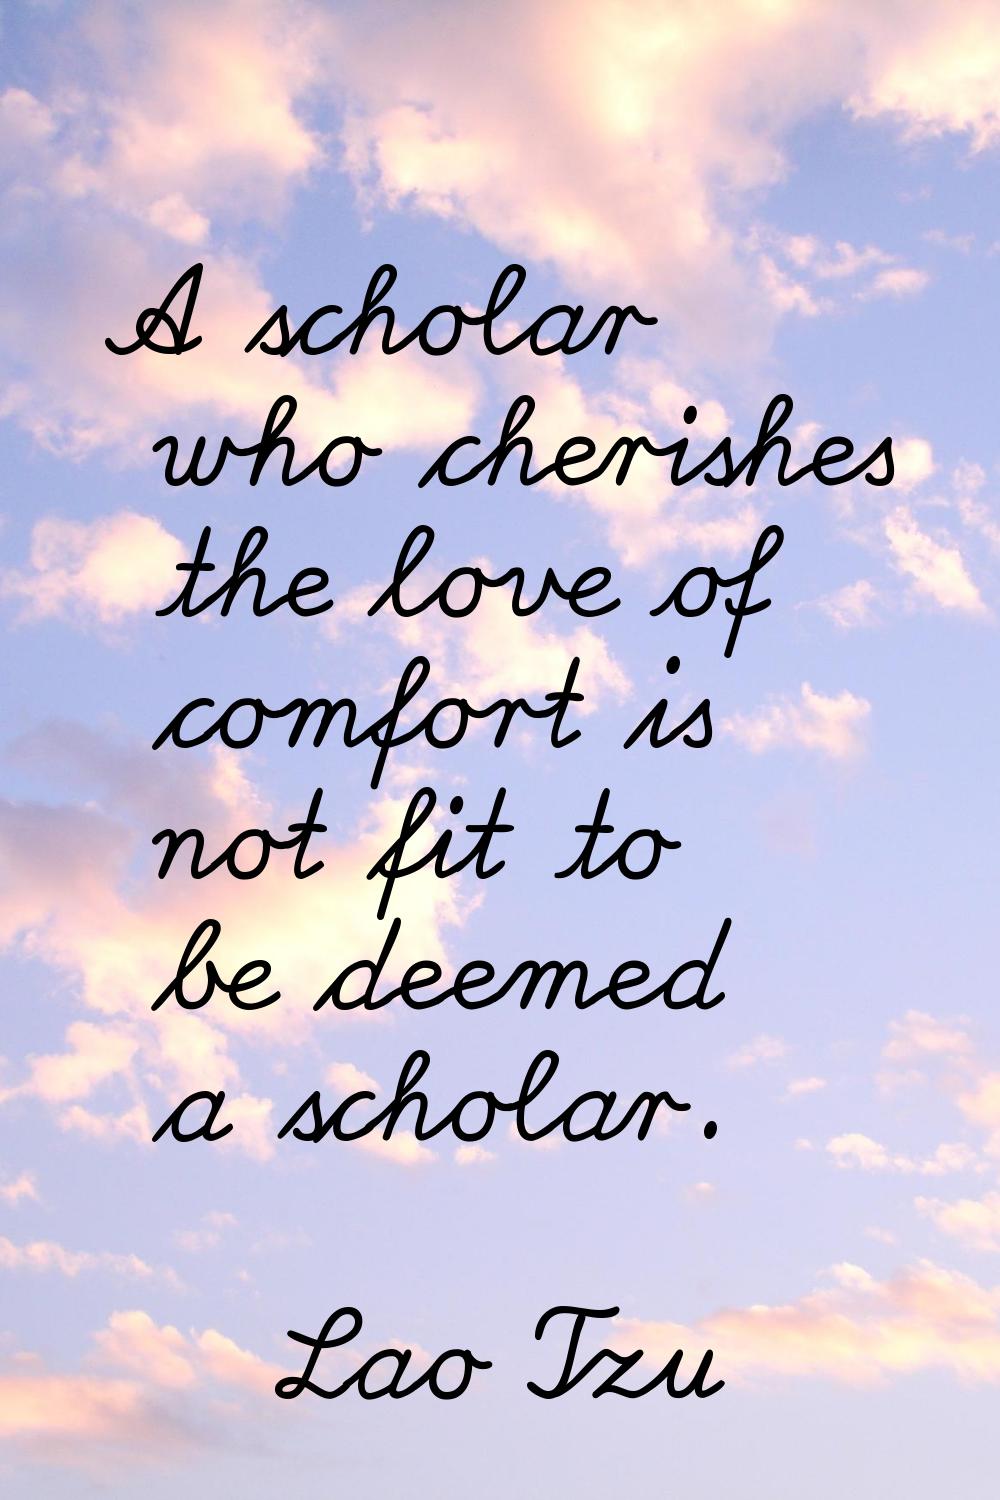 A scholar who cherishes the love of comfort is not fit to be deemed a scholar.